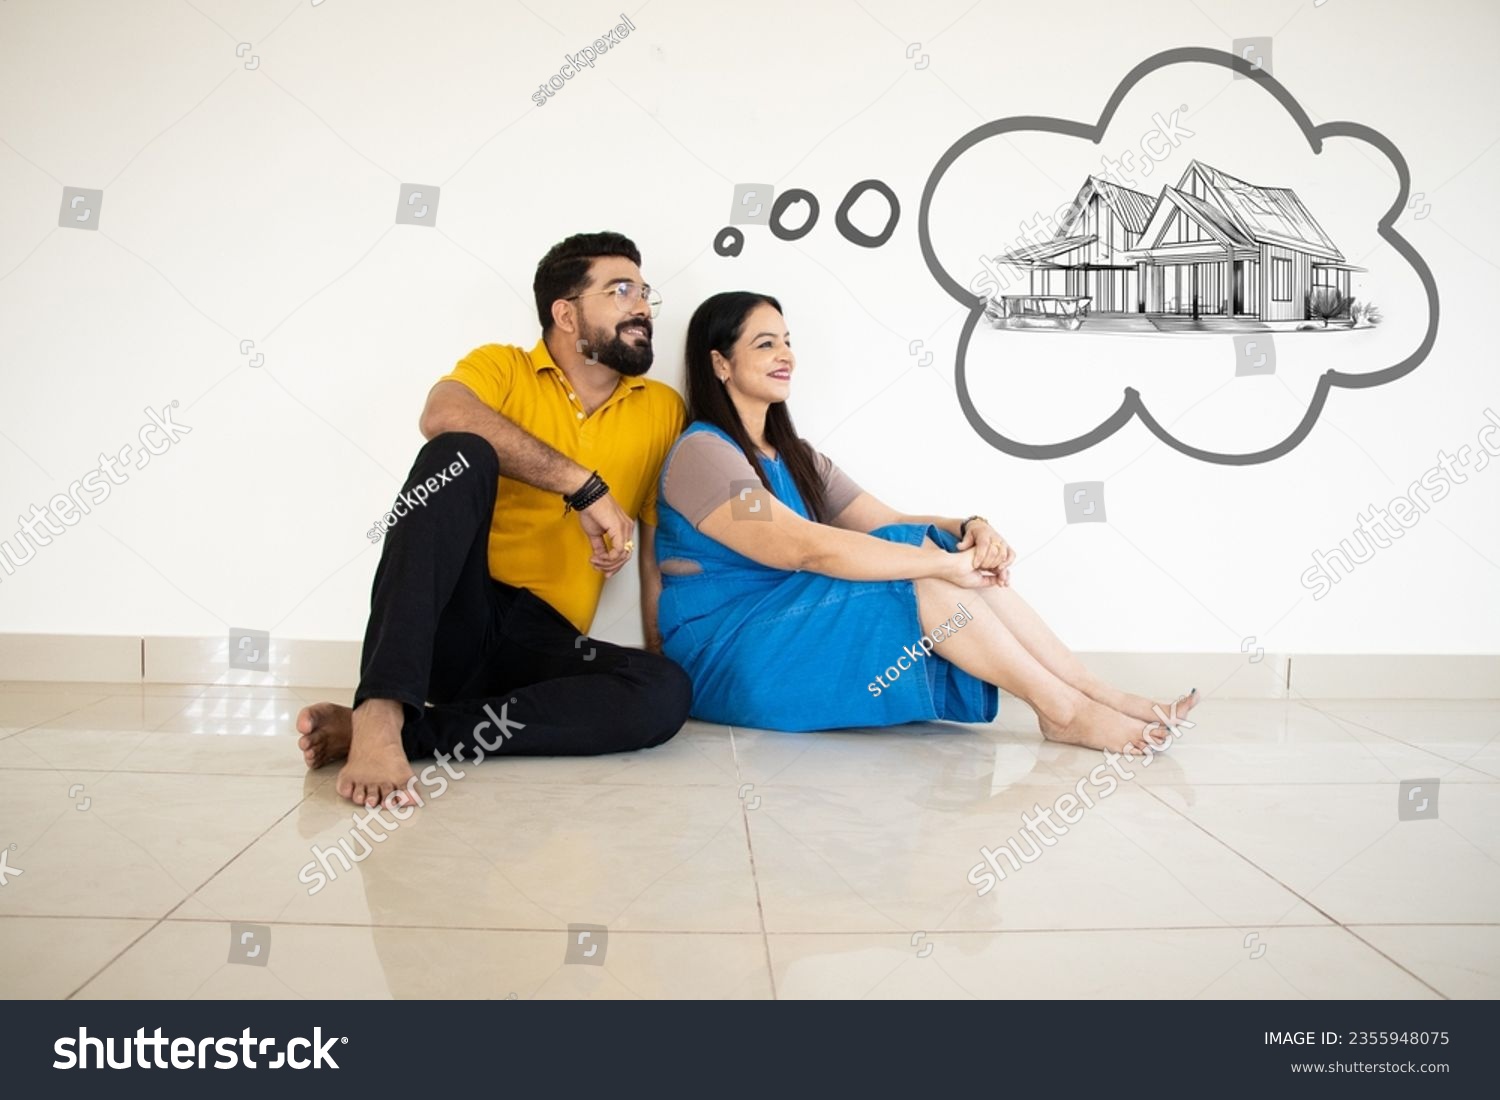 Young Indian Couple Sitting On Floor Thinking Of Getting Their Own House. Real Estate Concept. #2355948075